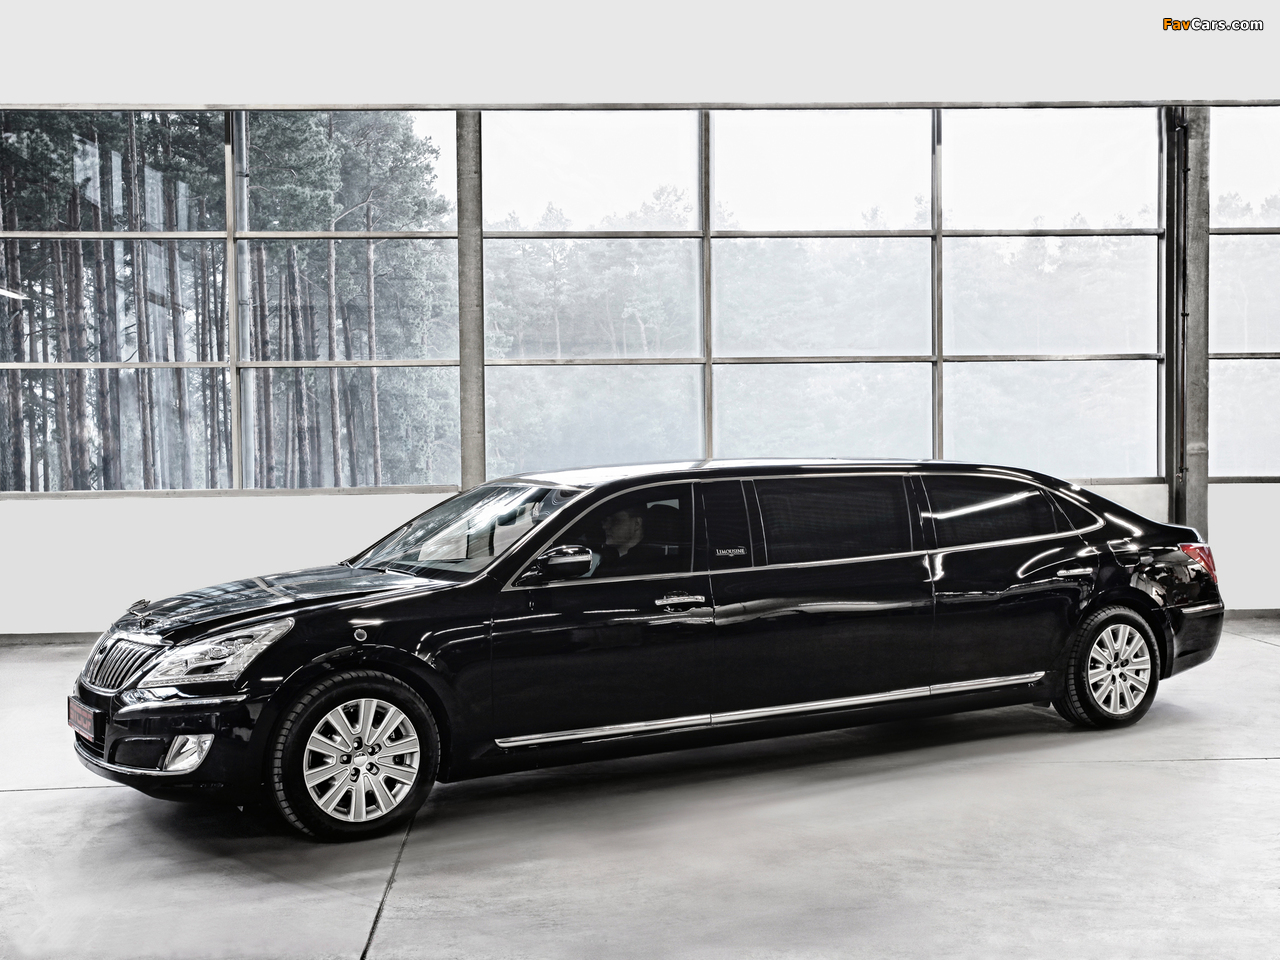 Hyundai Equus Armored Stretch Limousine by Stoof 2012 pictures (1280 x 960)